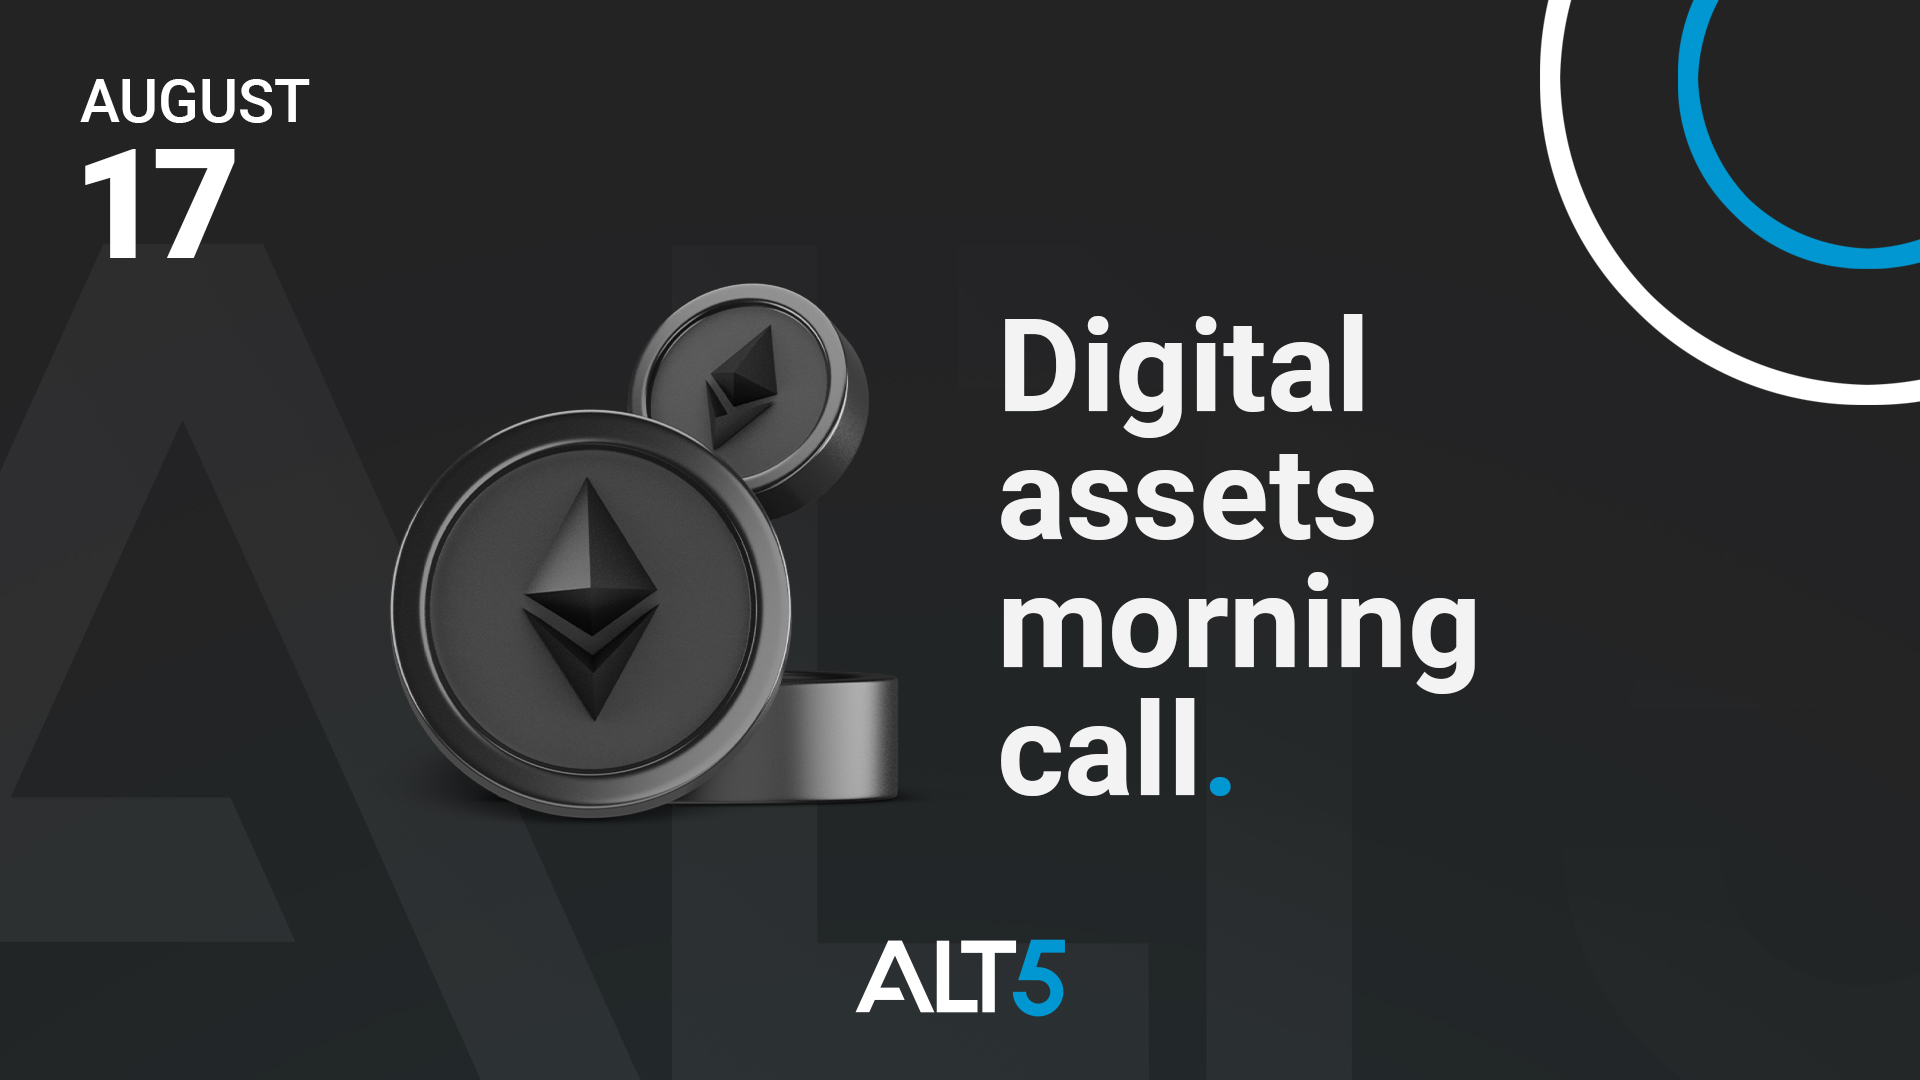 Digital Assets Morning Call: August 17 2022 - UK inflation and central bank policy expectations have implications for crypto